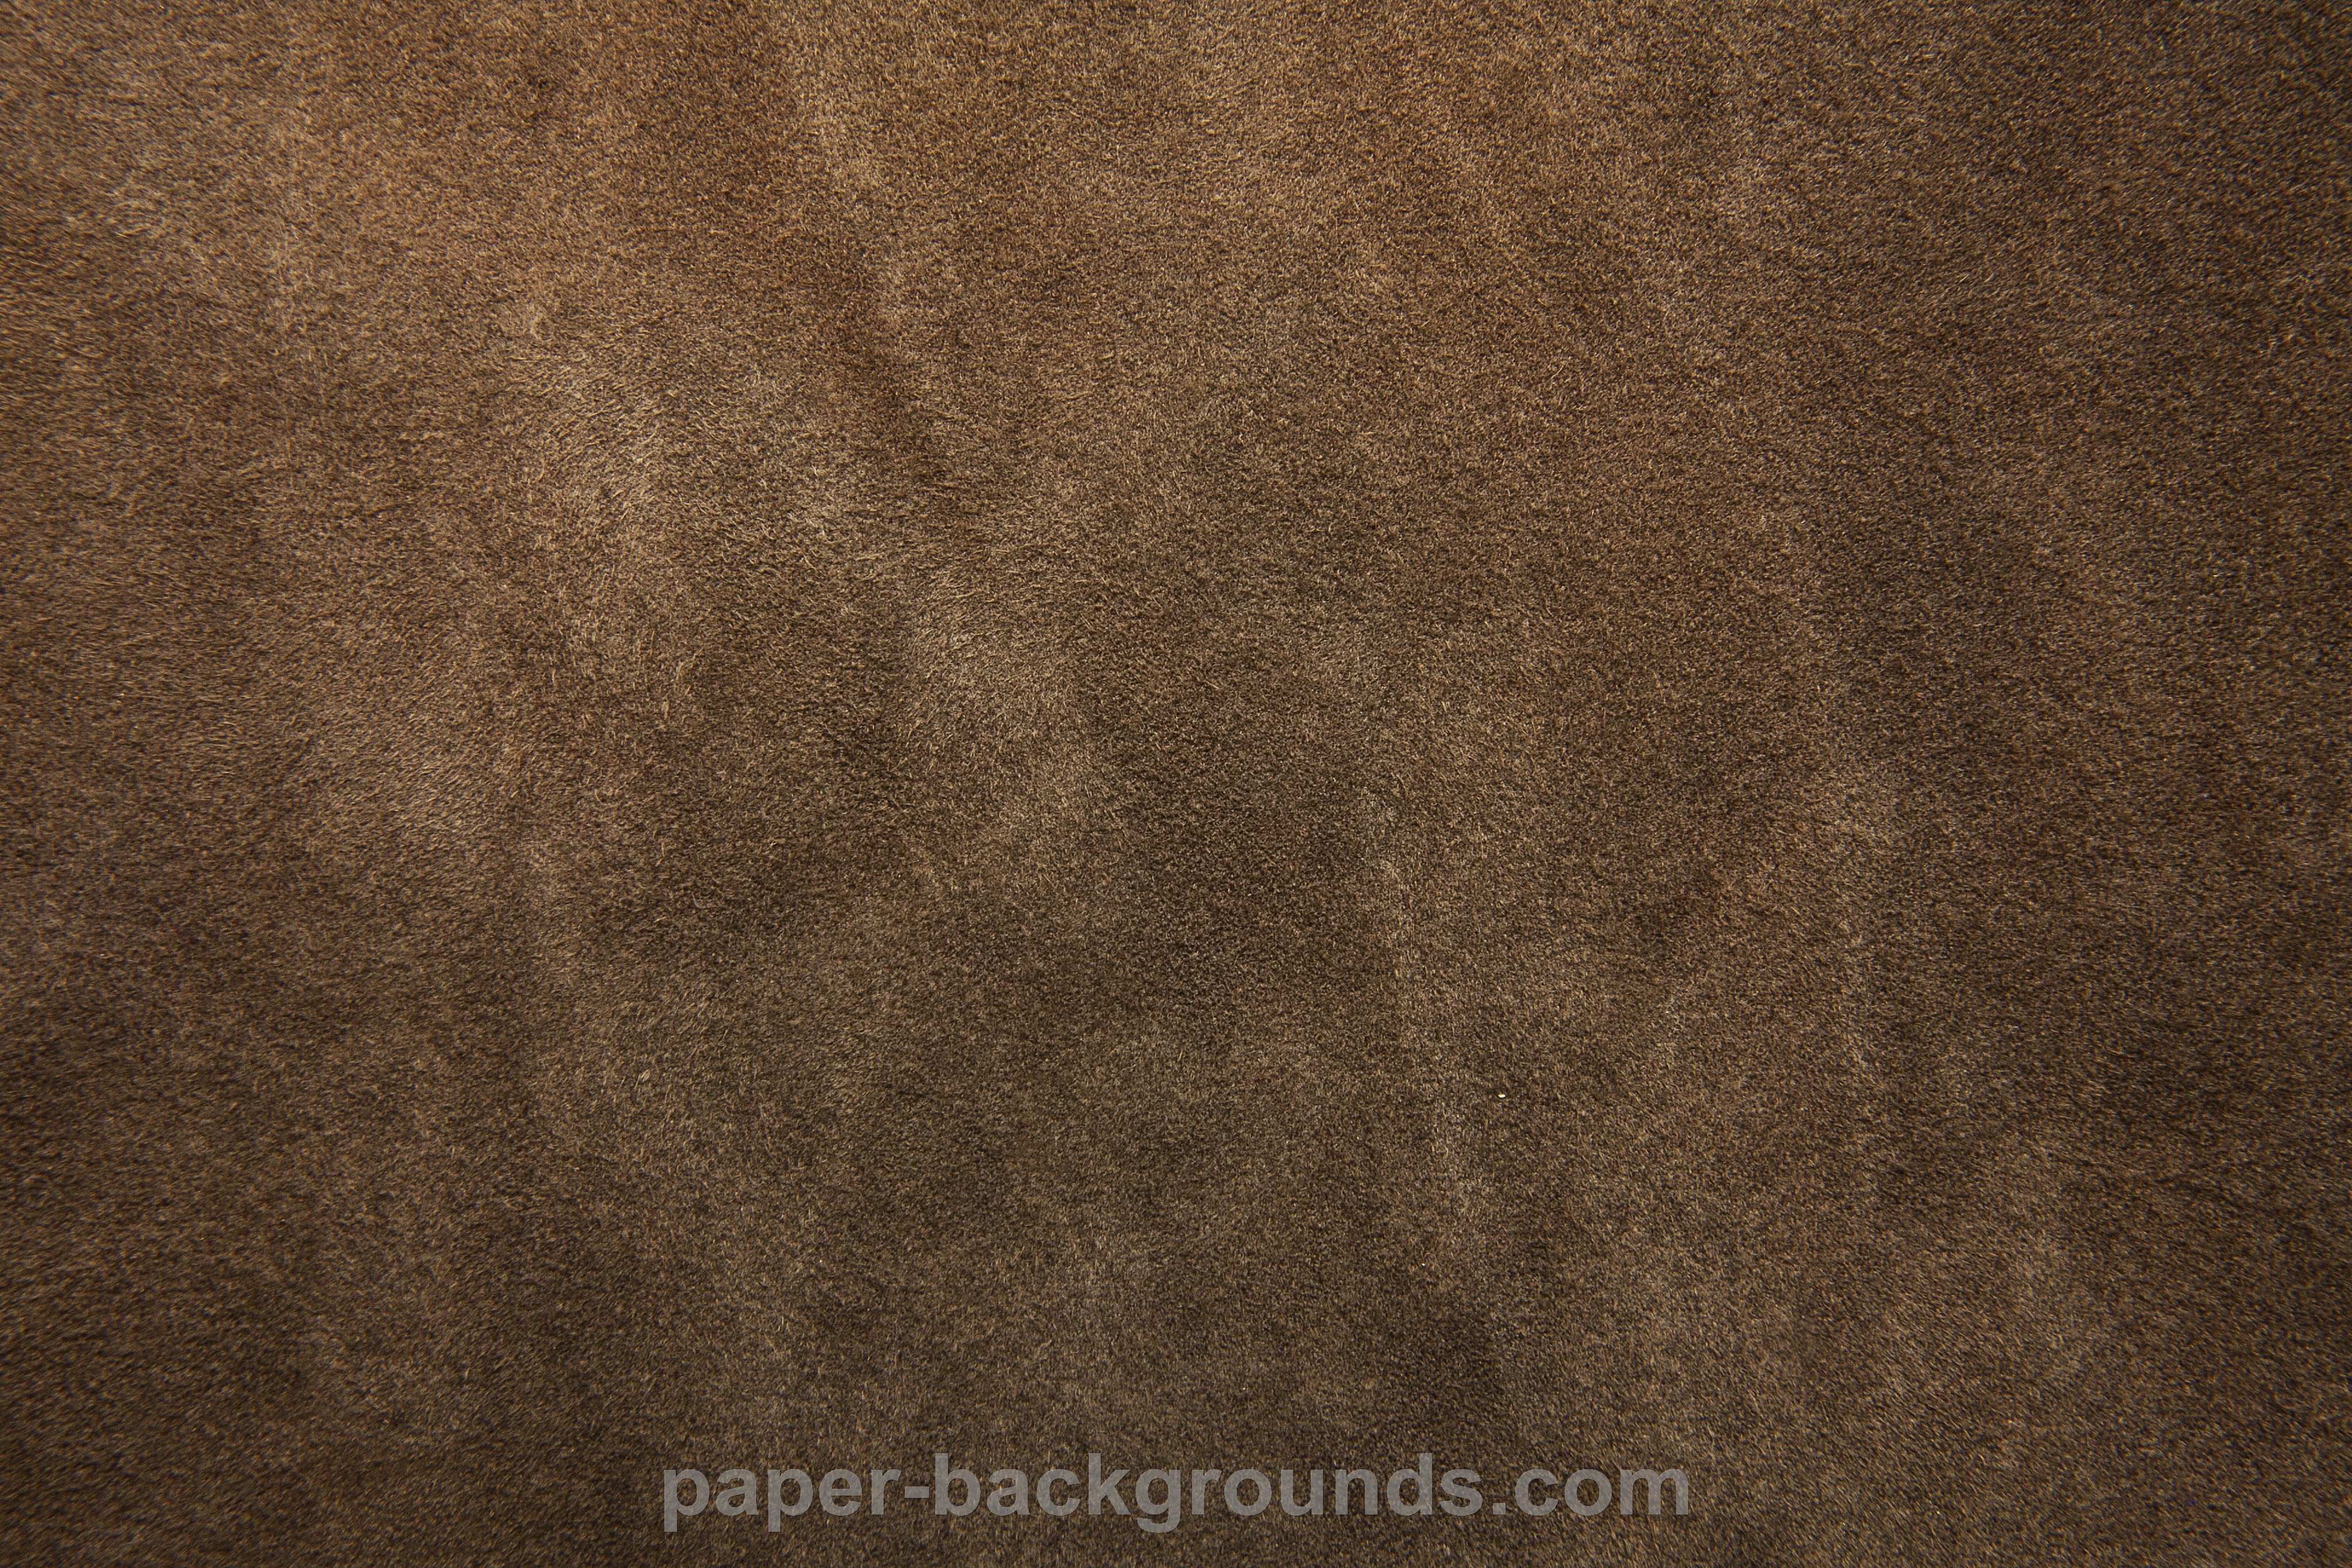 Paper Backgrounds brown leather texture background